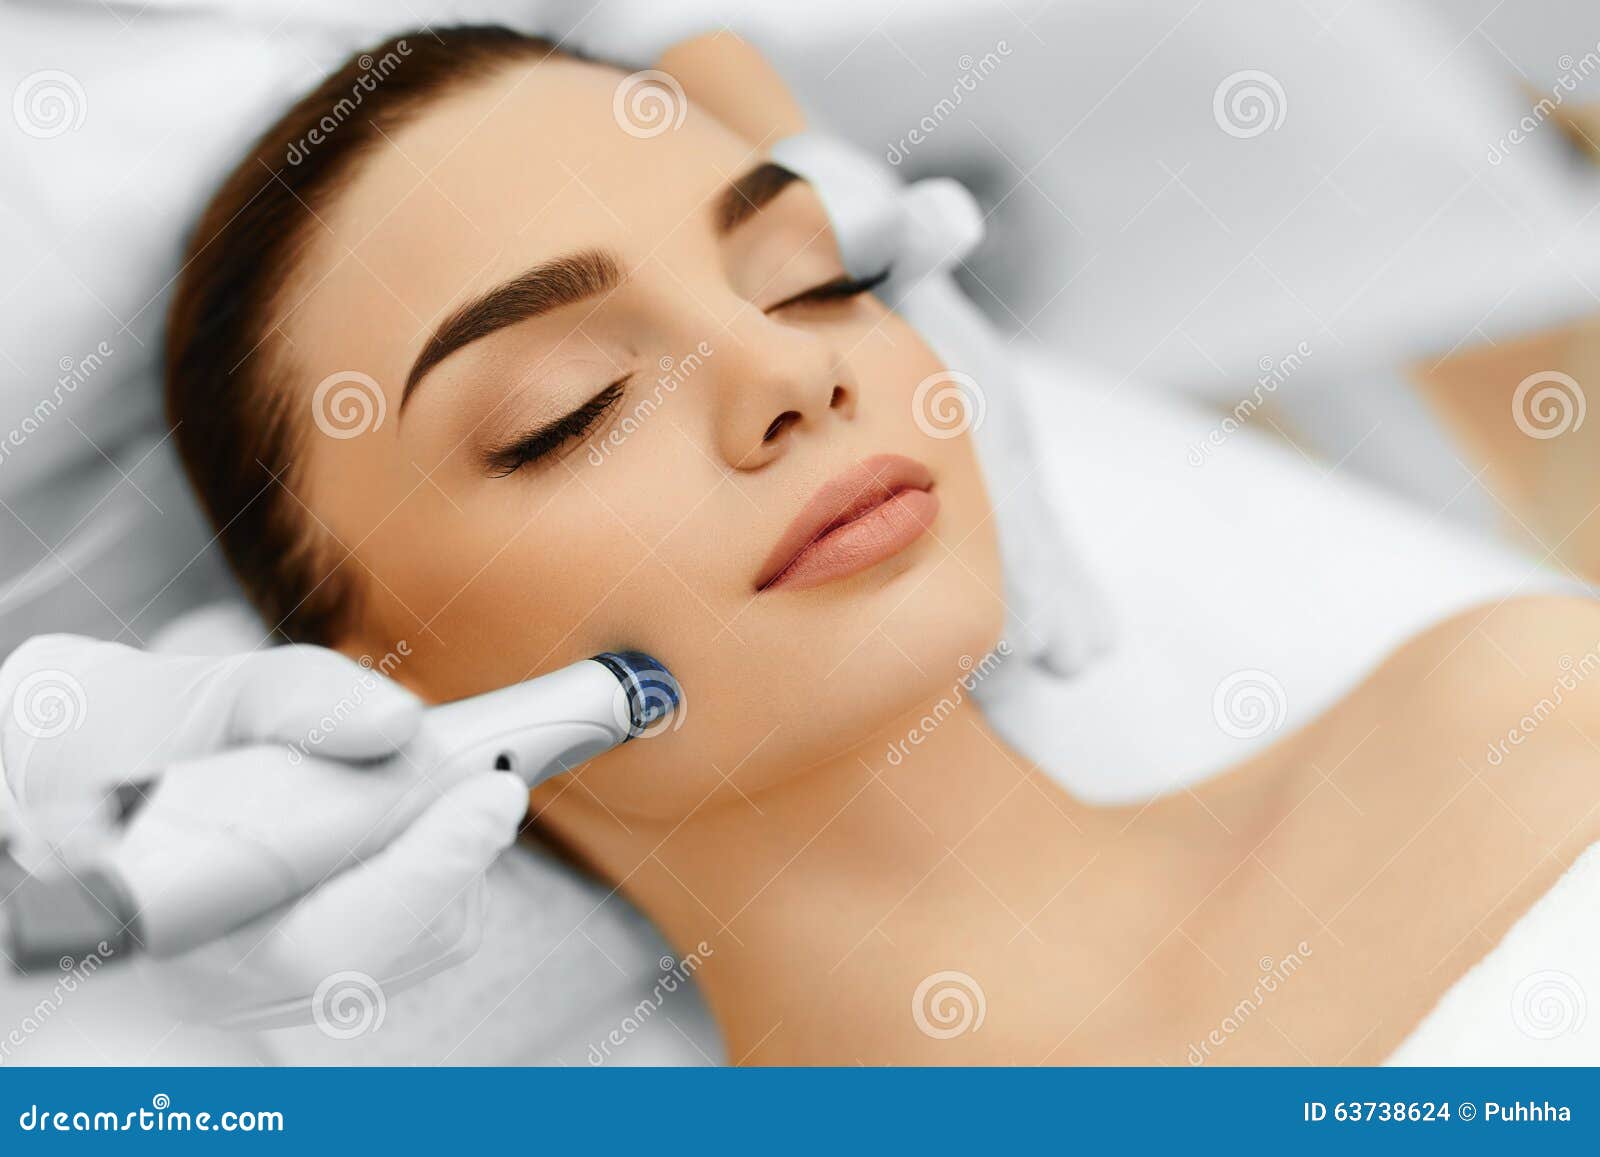 Face Skin Care. Facial Hydro Microdermabrasion Peeling Treatment Stock